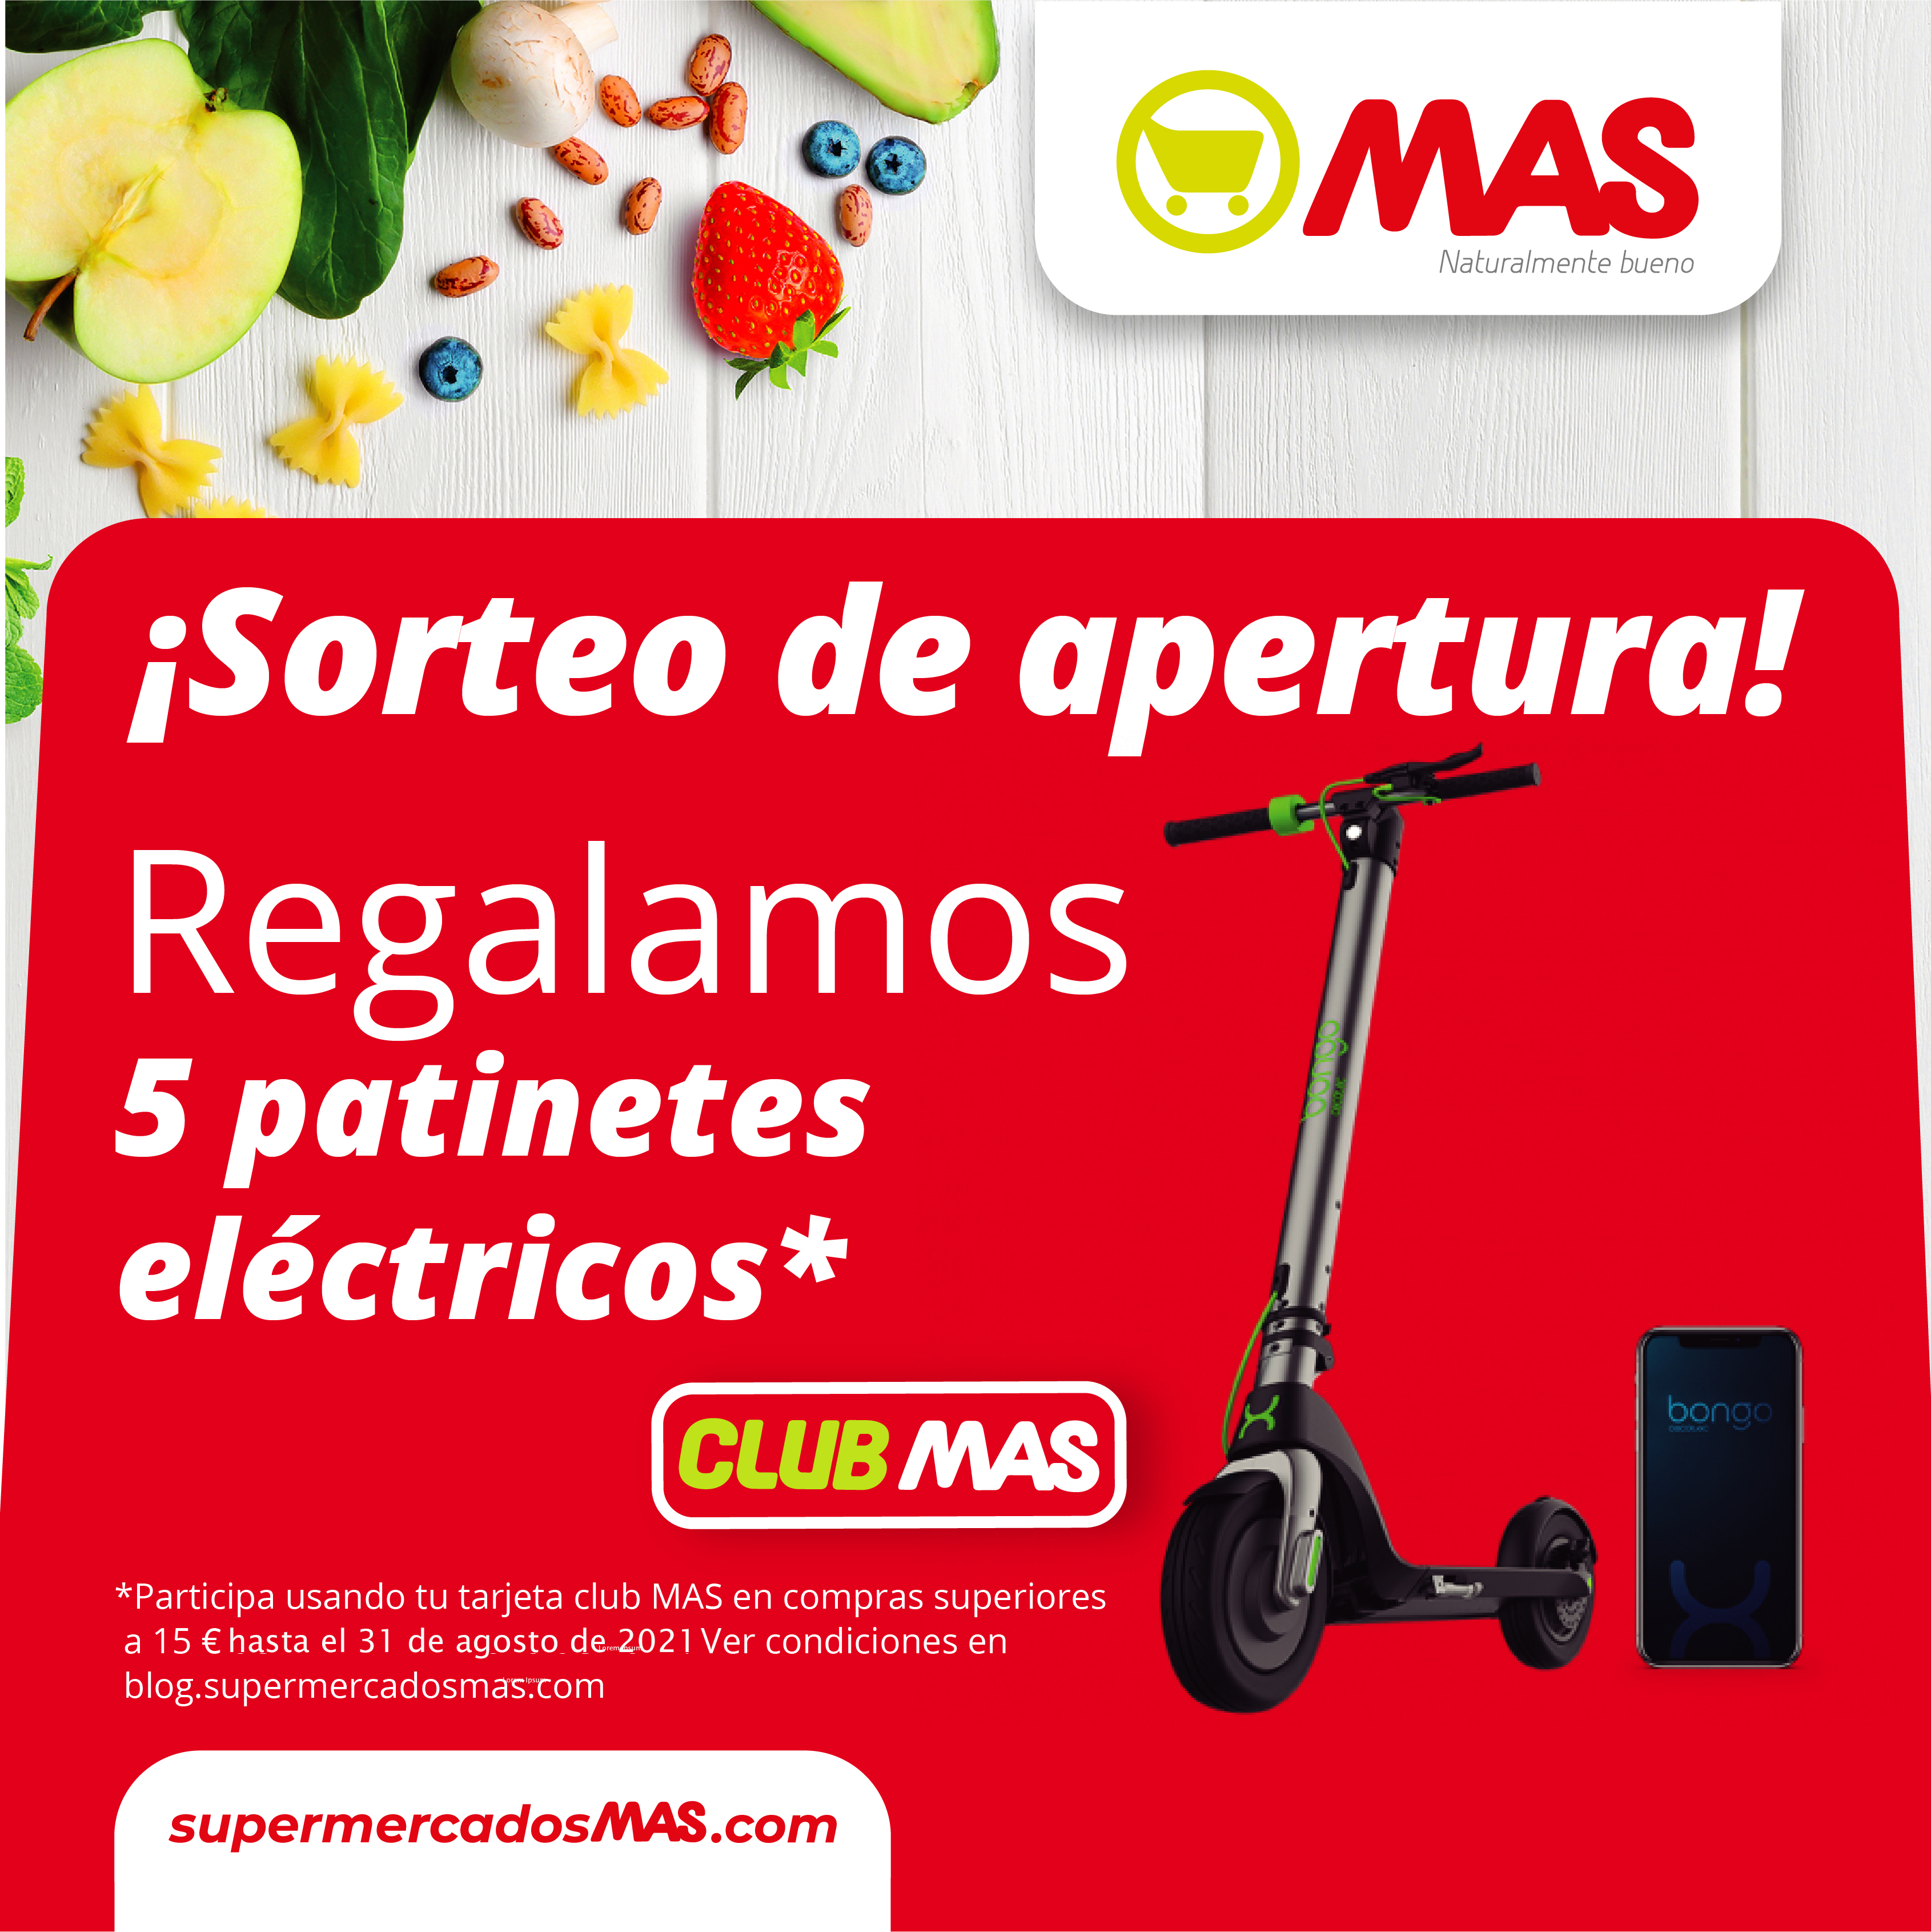 bases-legales-sorteo-patinetes-electricos